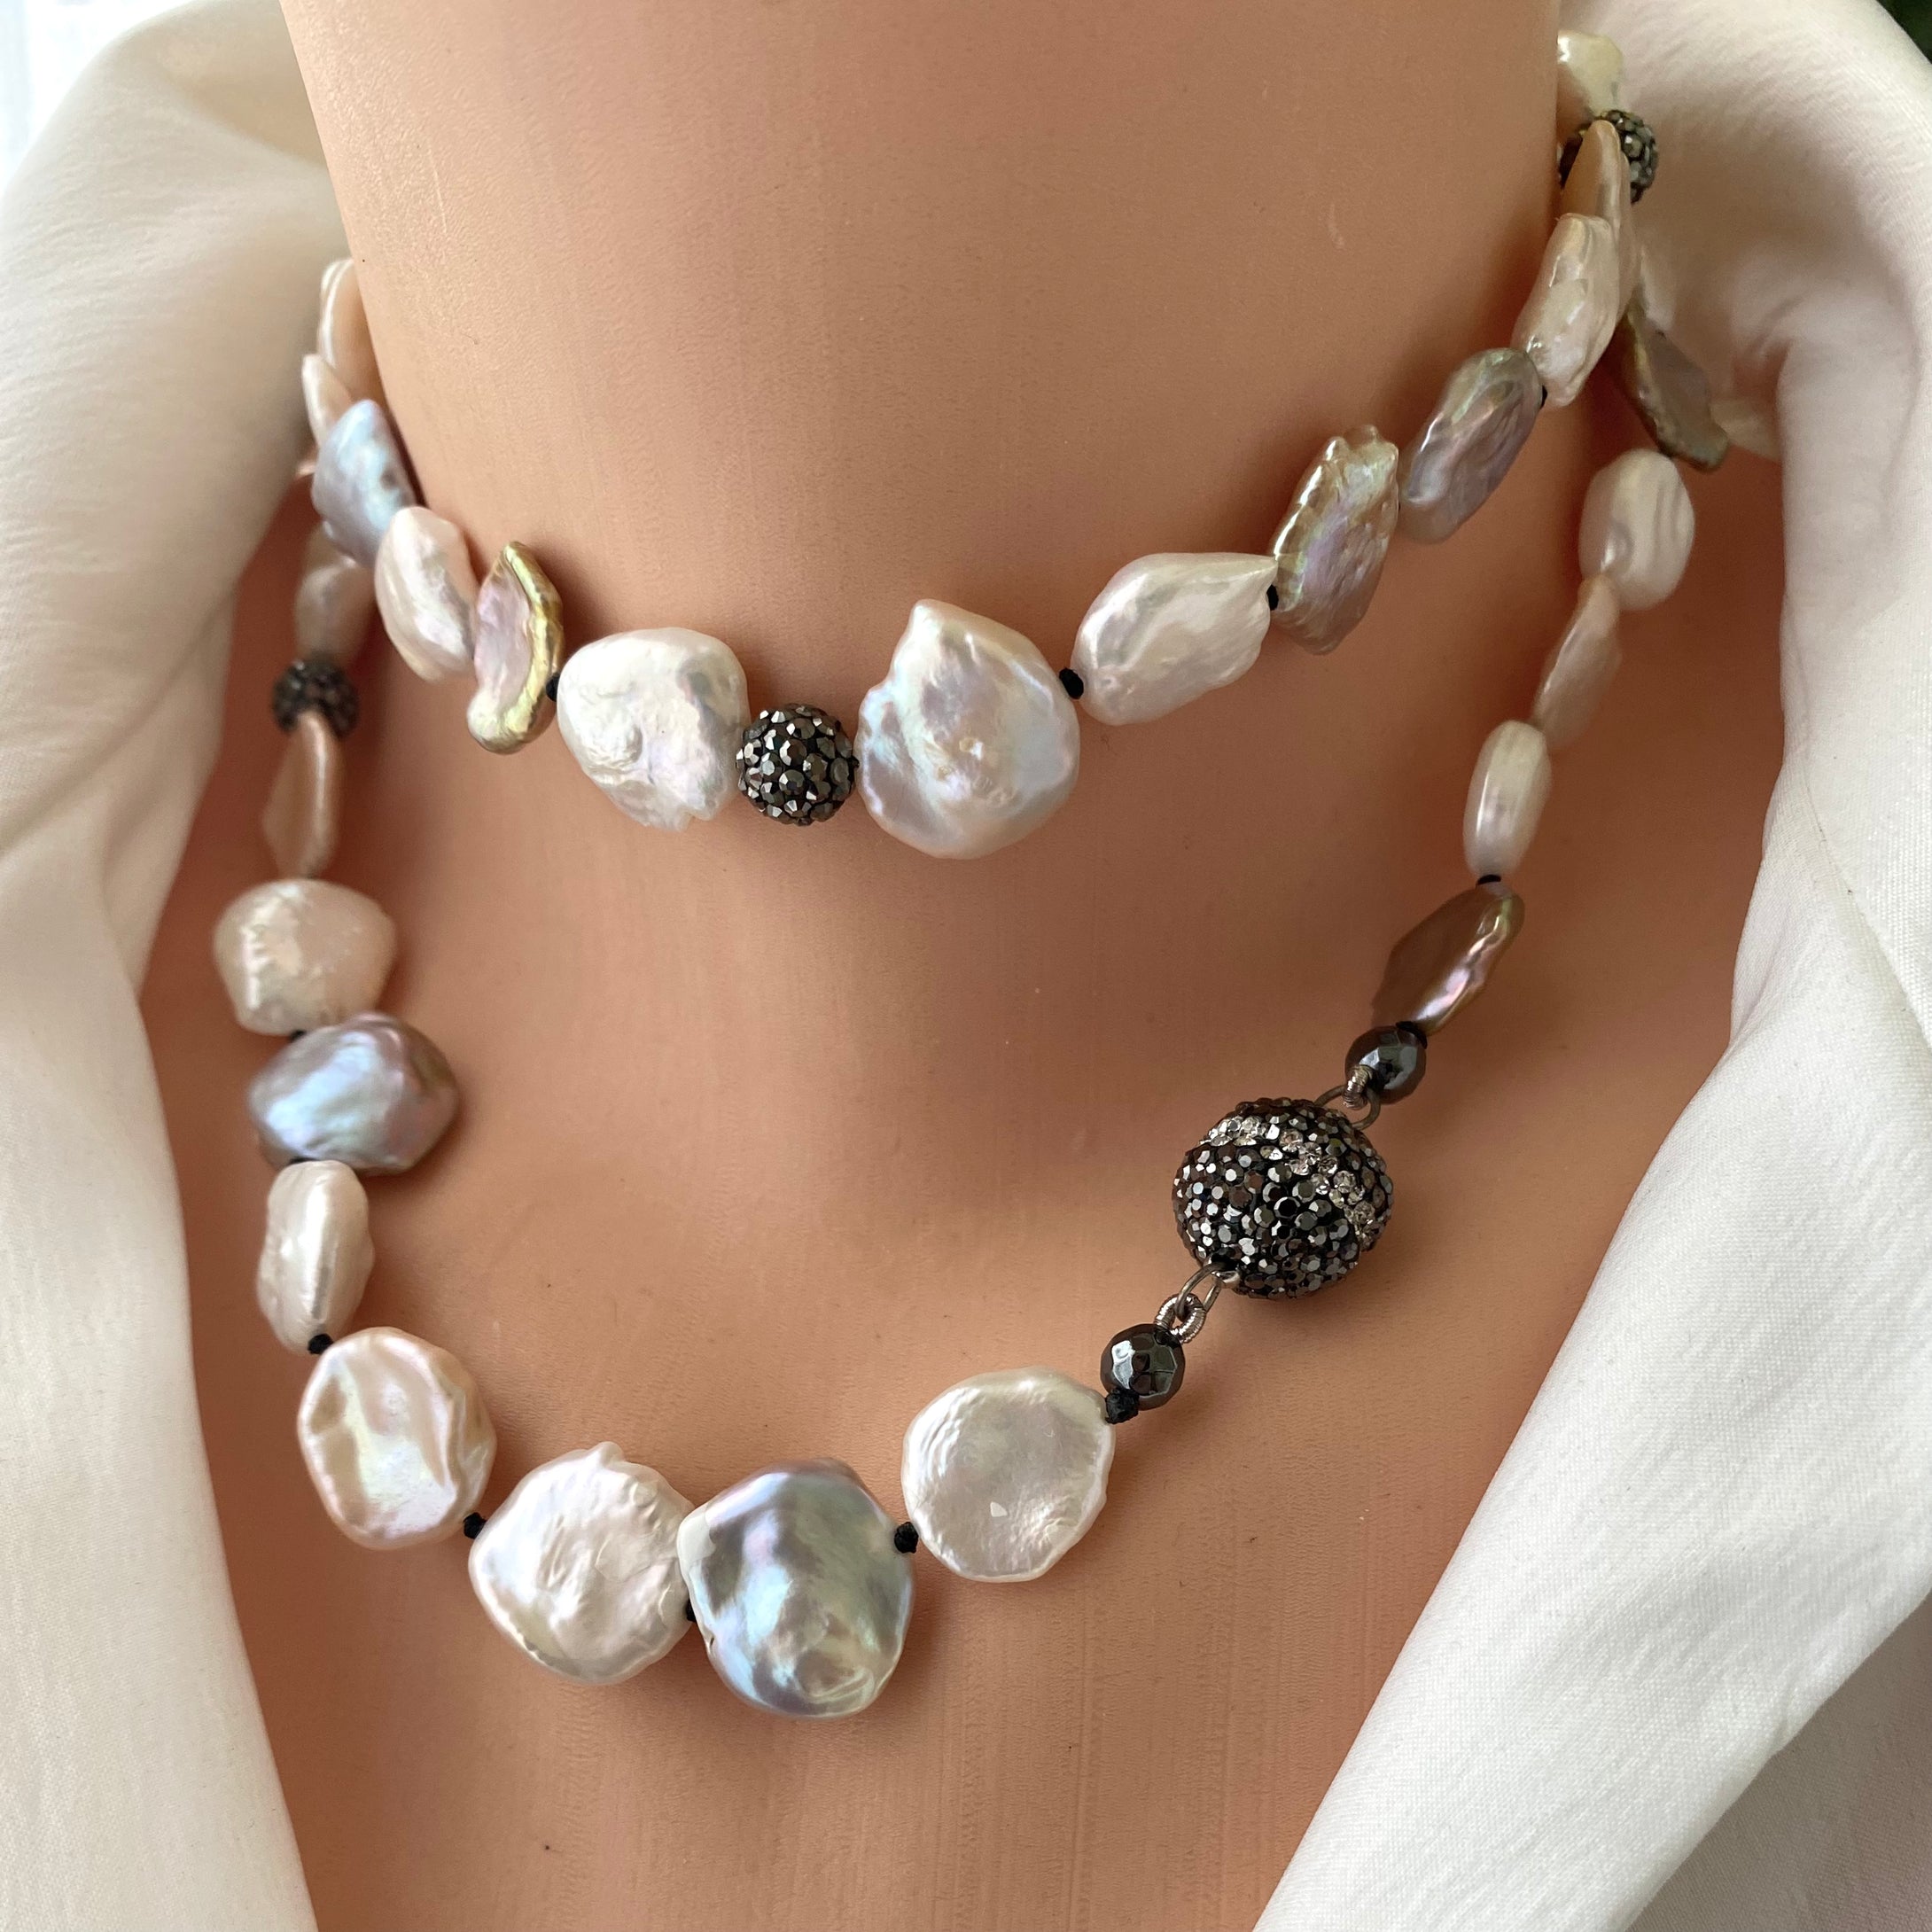 Freshwater Pearl Long Necklace, Flat Pastel Keshi Pearls, Rhinestone Pave Beads and Magnetic Clasp, 31